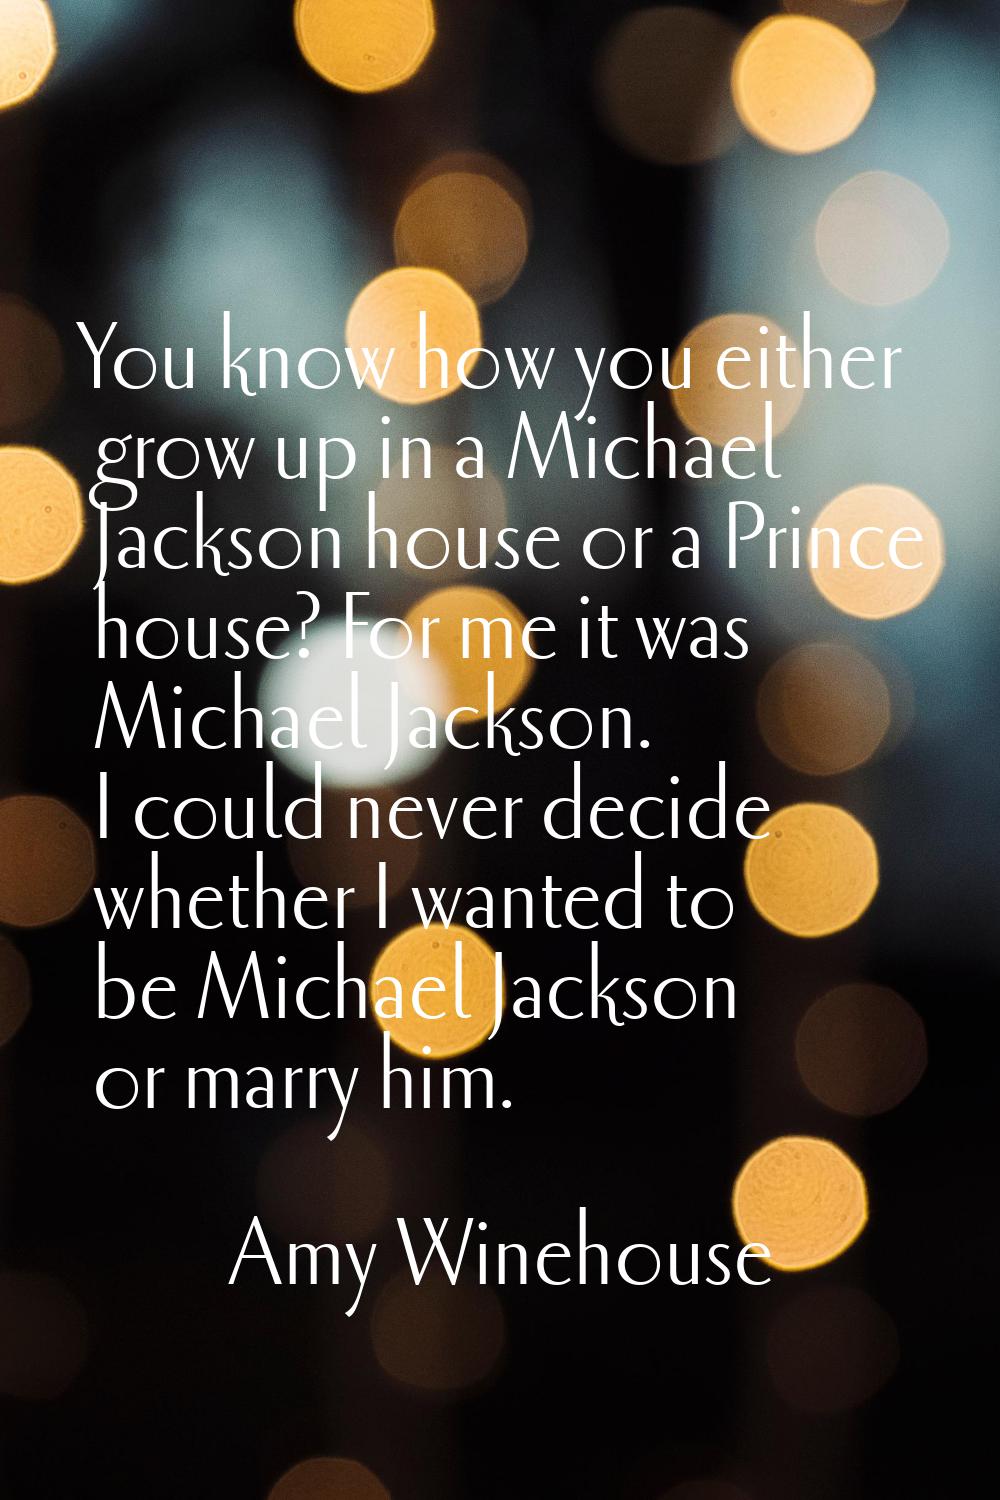 You know how you either grow up in a Michael Jackson house or a Prince house? For me it was Michael